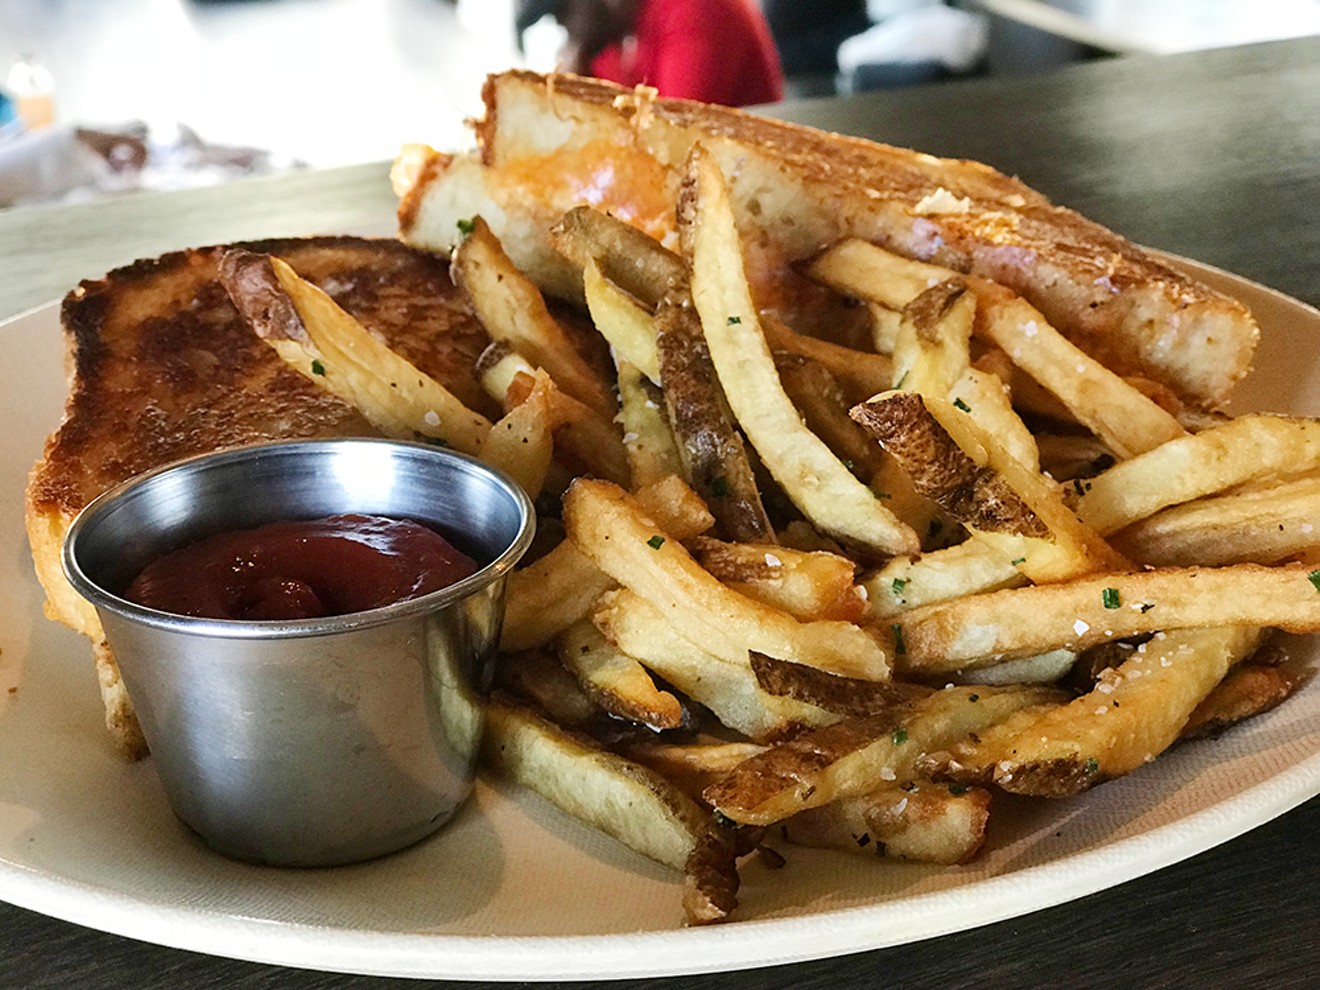 The Grilled Cheese at Tout Suite is everything you would want in a grilled cheese sandwich.